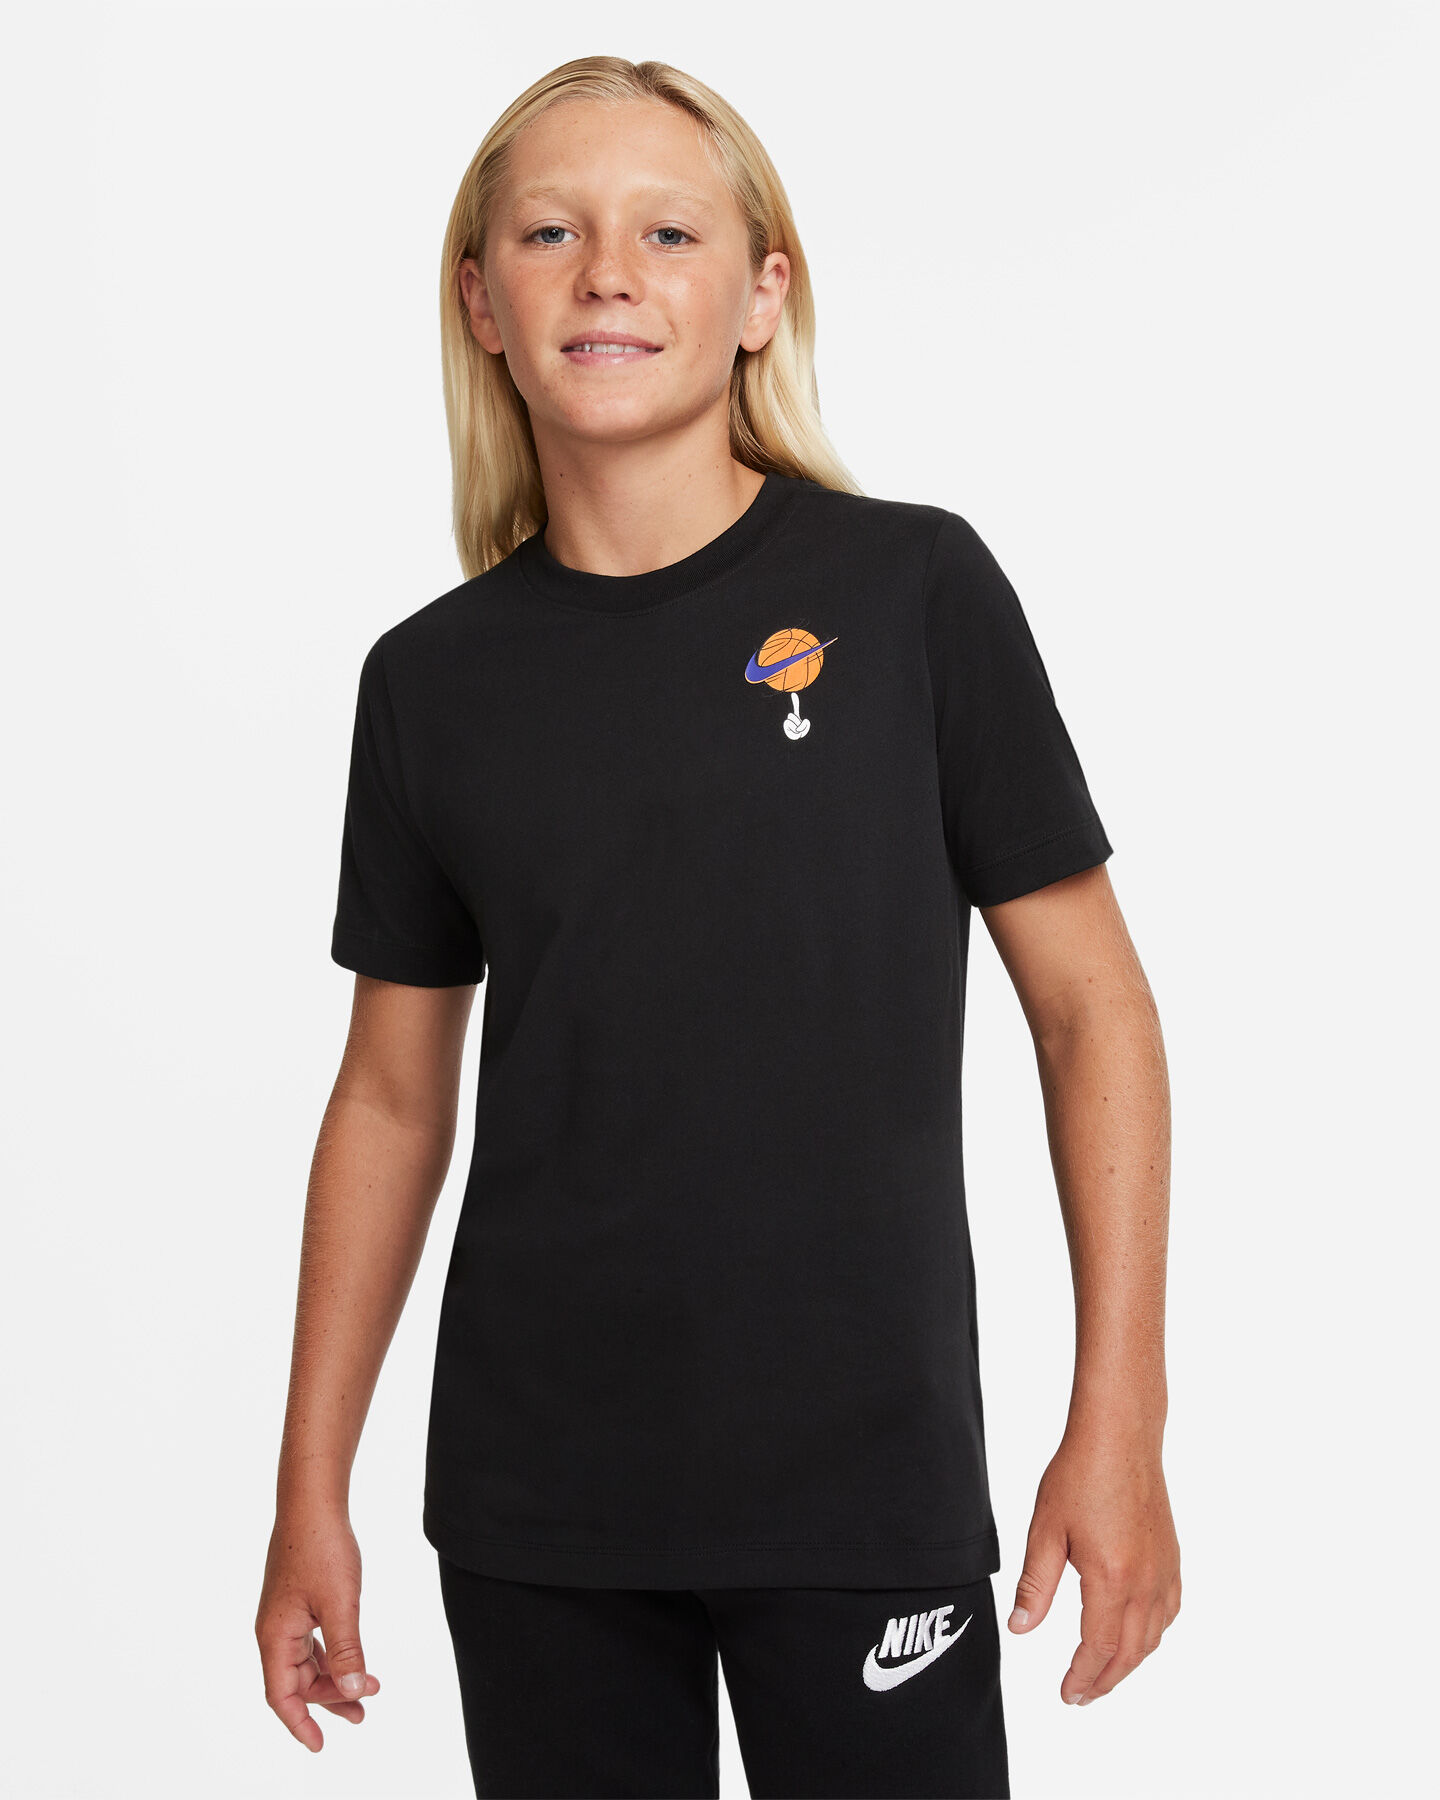  T-Shirt NIKE SPACE JAM JR S5320590|010|S scatto 0